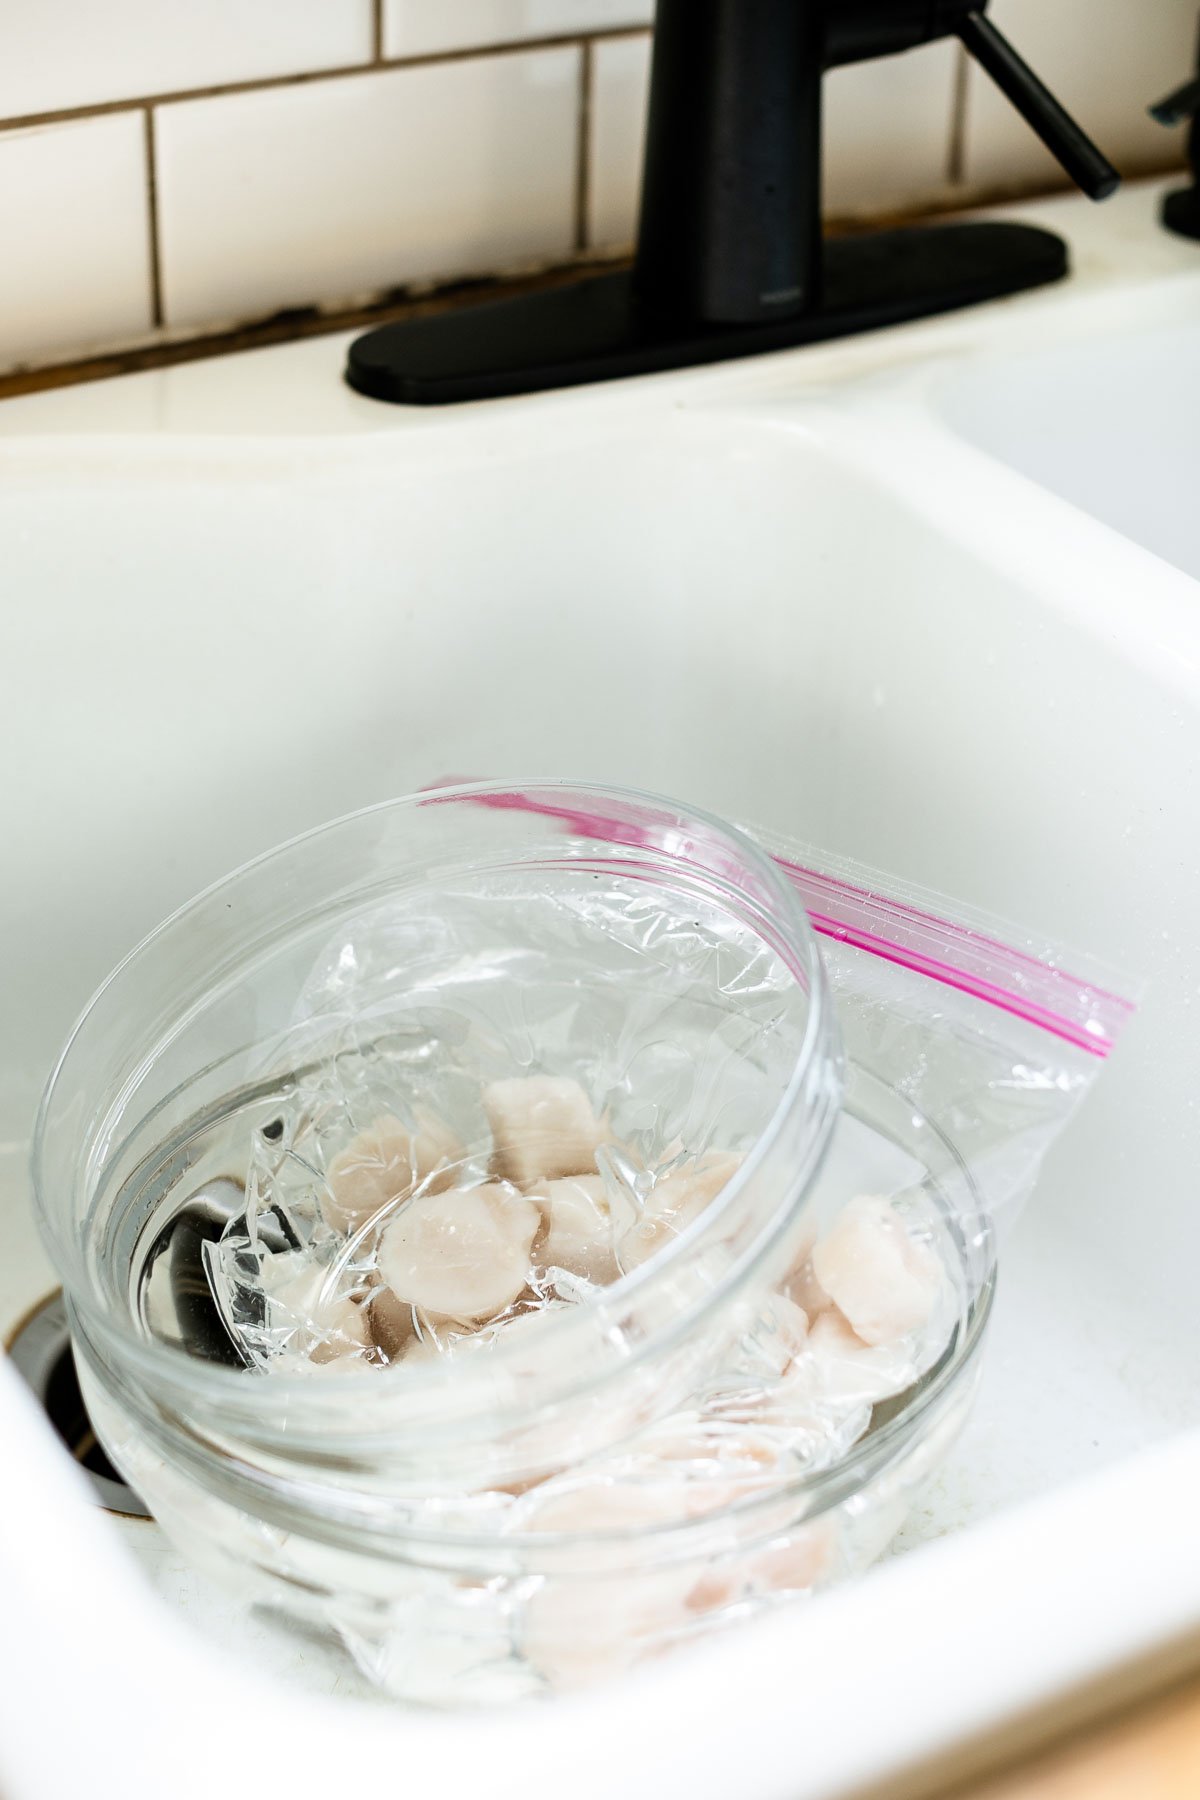 How to thaw frozen scallops – Frozen scallops in a zip-top bag in a glass mixing bowl in a farmhouse-style sink. A second glass mixing bowl sits atop the scallops, keeping them submerged in cool water.